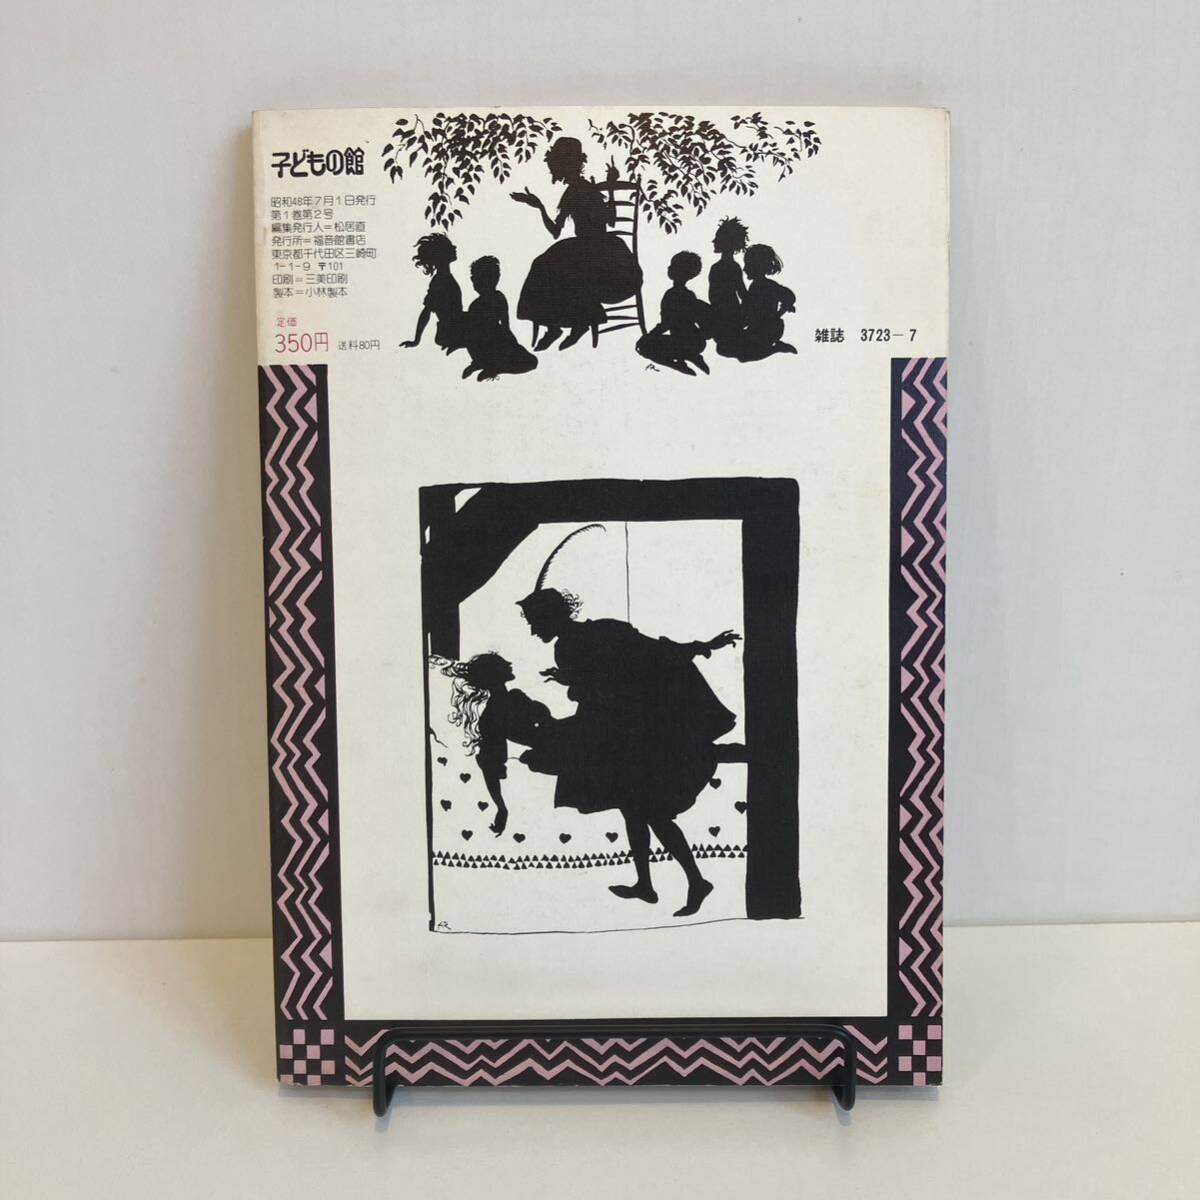 240518[ child. pavilion ]1973 year 7 month number No.2* Arthur lacquer m large hill confidence length new futoshi Watanabe . man . inside . one * picture book luck sound pavilion bookstore old book magazine 